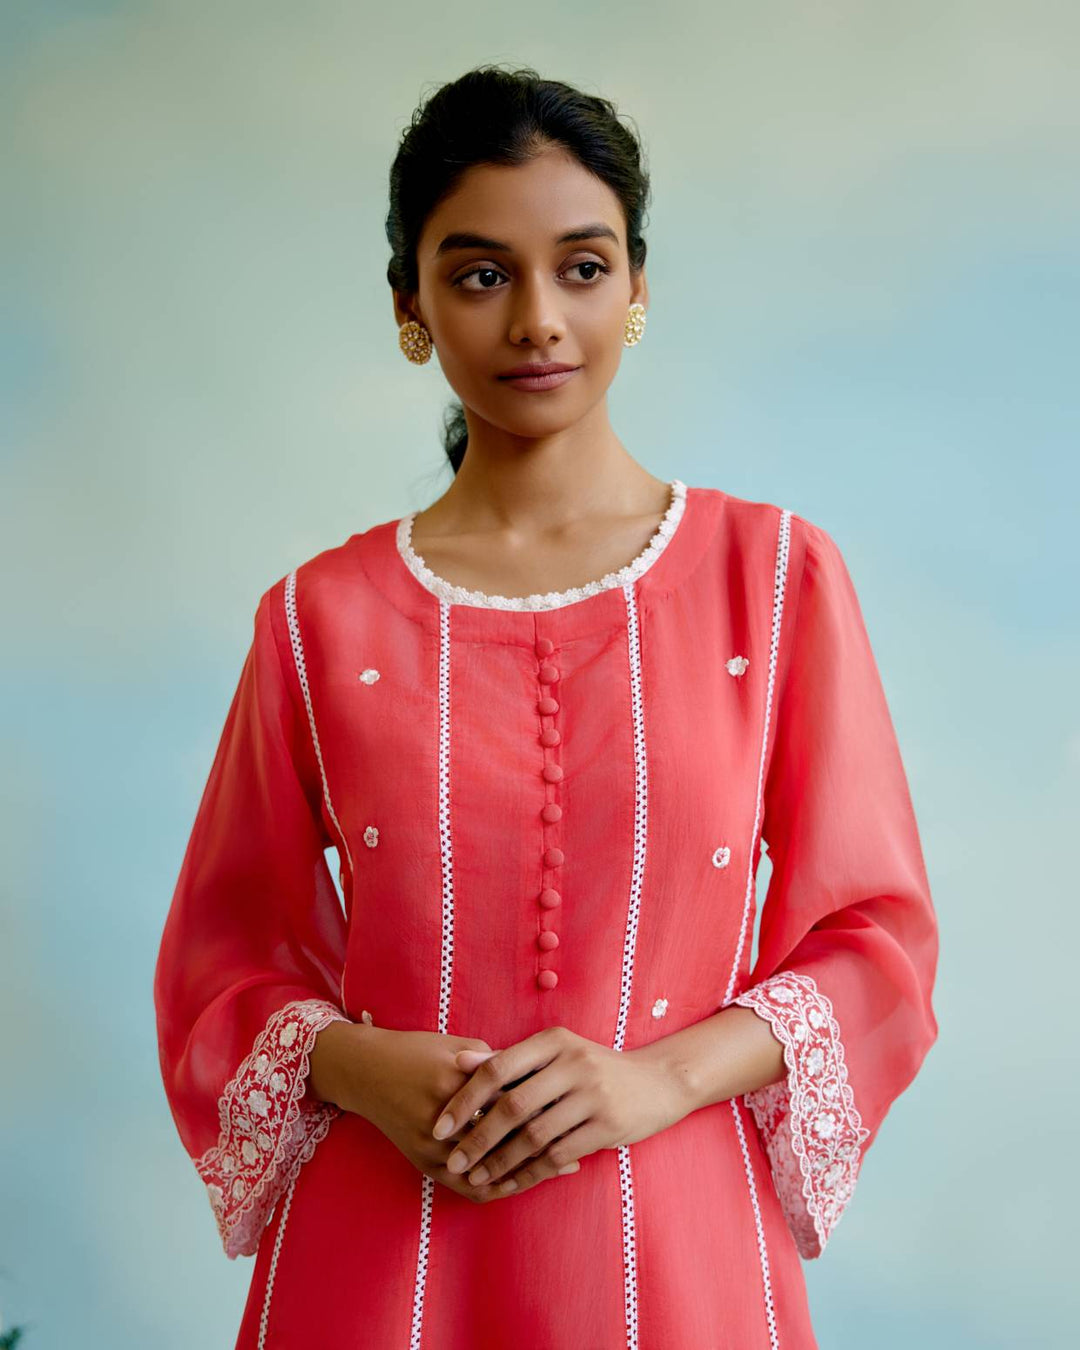 Coral Rose Anarkali with Wide Leg Pants